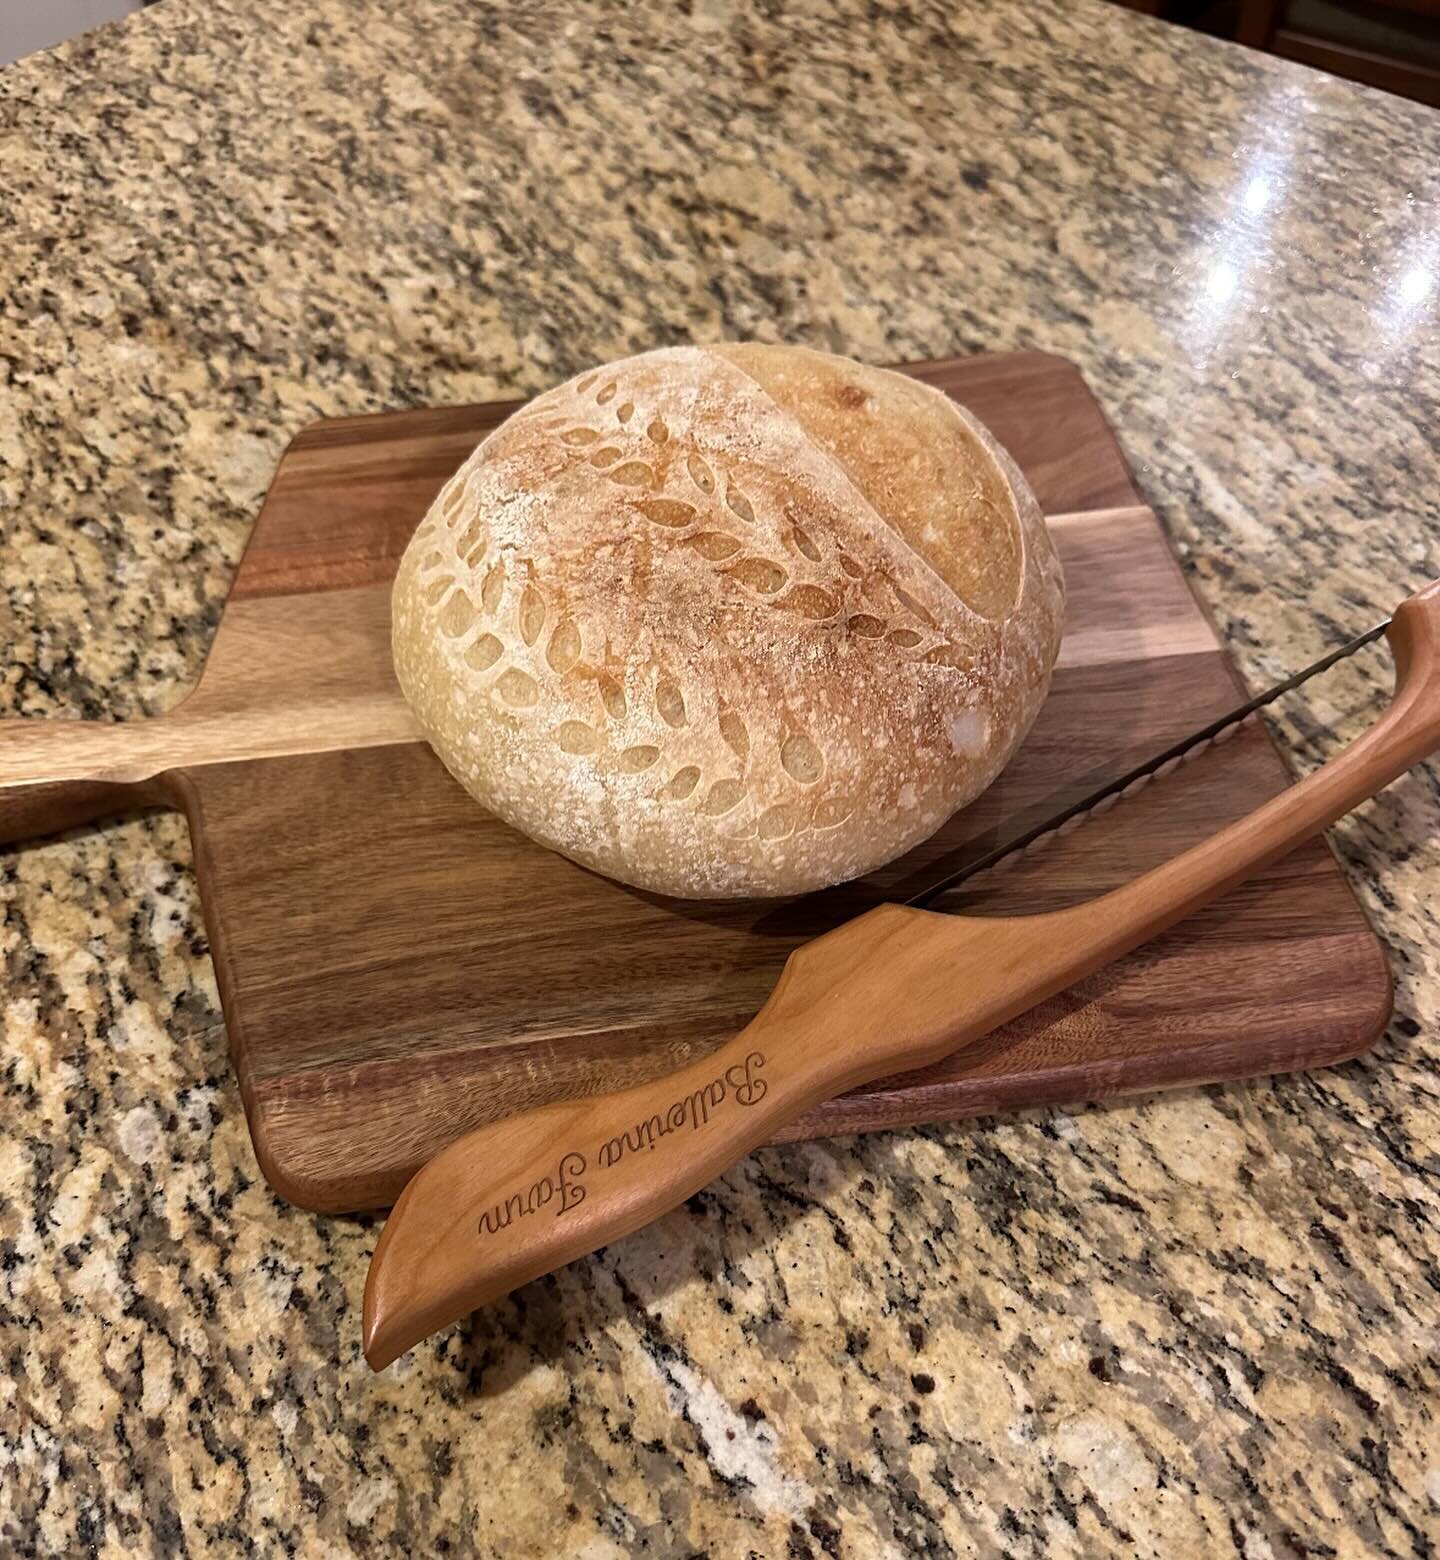 TRANSFORMATION!

One of my dearest friends and mentors has an autoimmune disease and has been gluten free for years and years to manage her health holistically. 

When she started learning about the benefits of sourdough, she started to think this mi